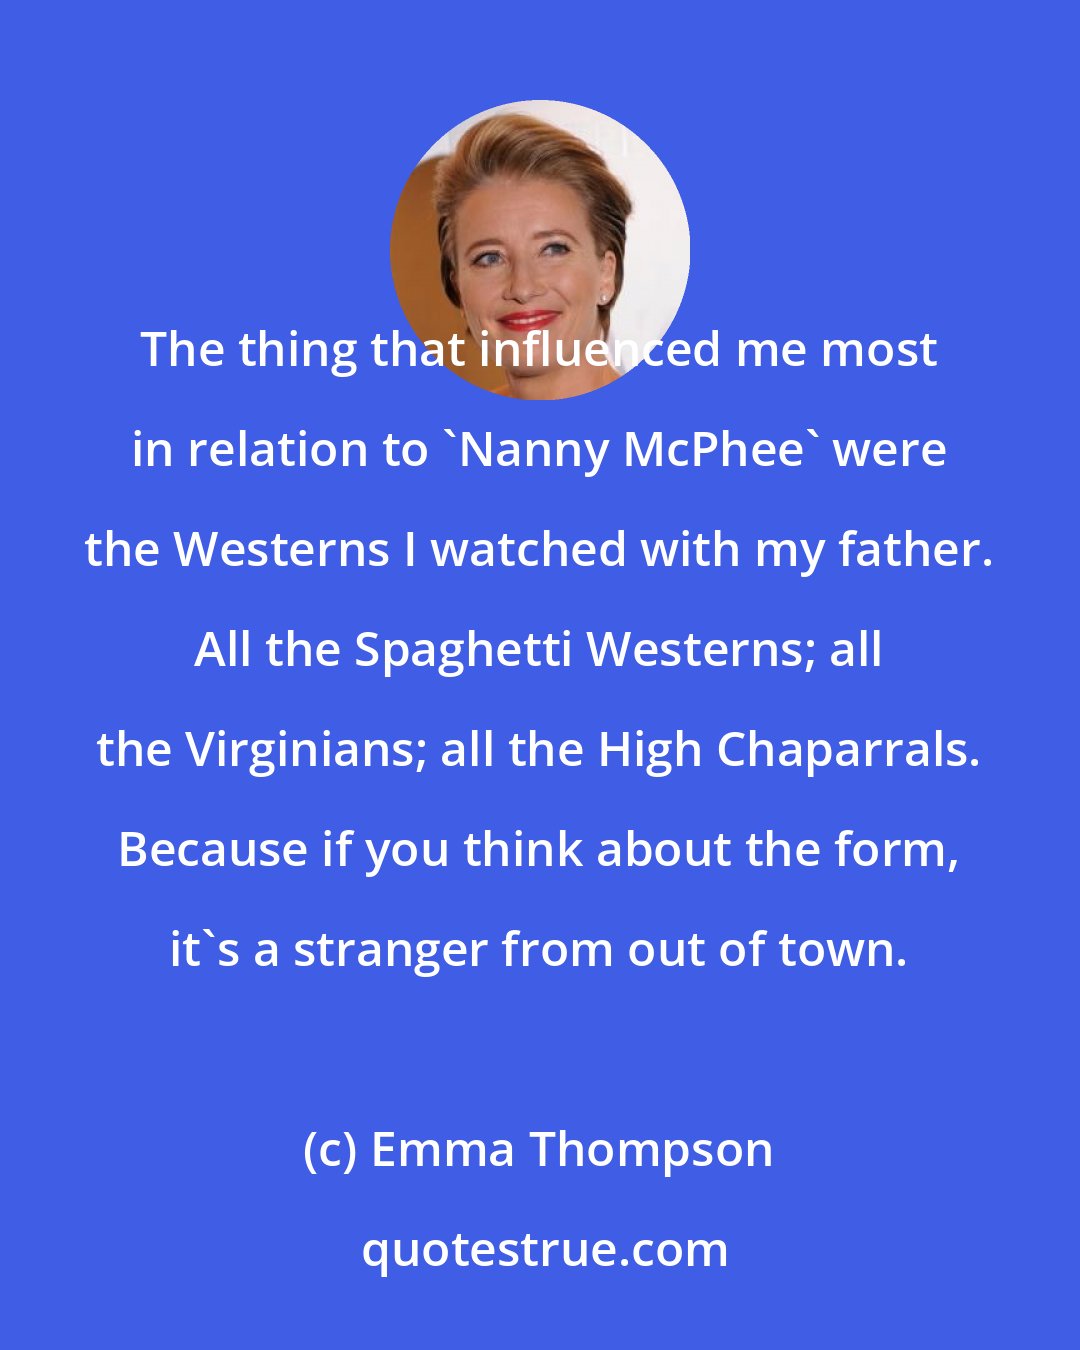 Emma Thompson: The thing that influenced me most in relation to 'Nanny McPhee' were the Westerns I watched with my father. All the Spaghetti Westerns; all the Virginians; all the High Chaparrals. Because if you think about the form, it's a stranger from out of town.